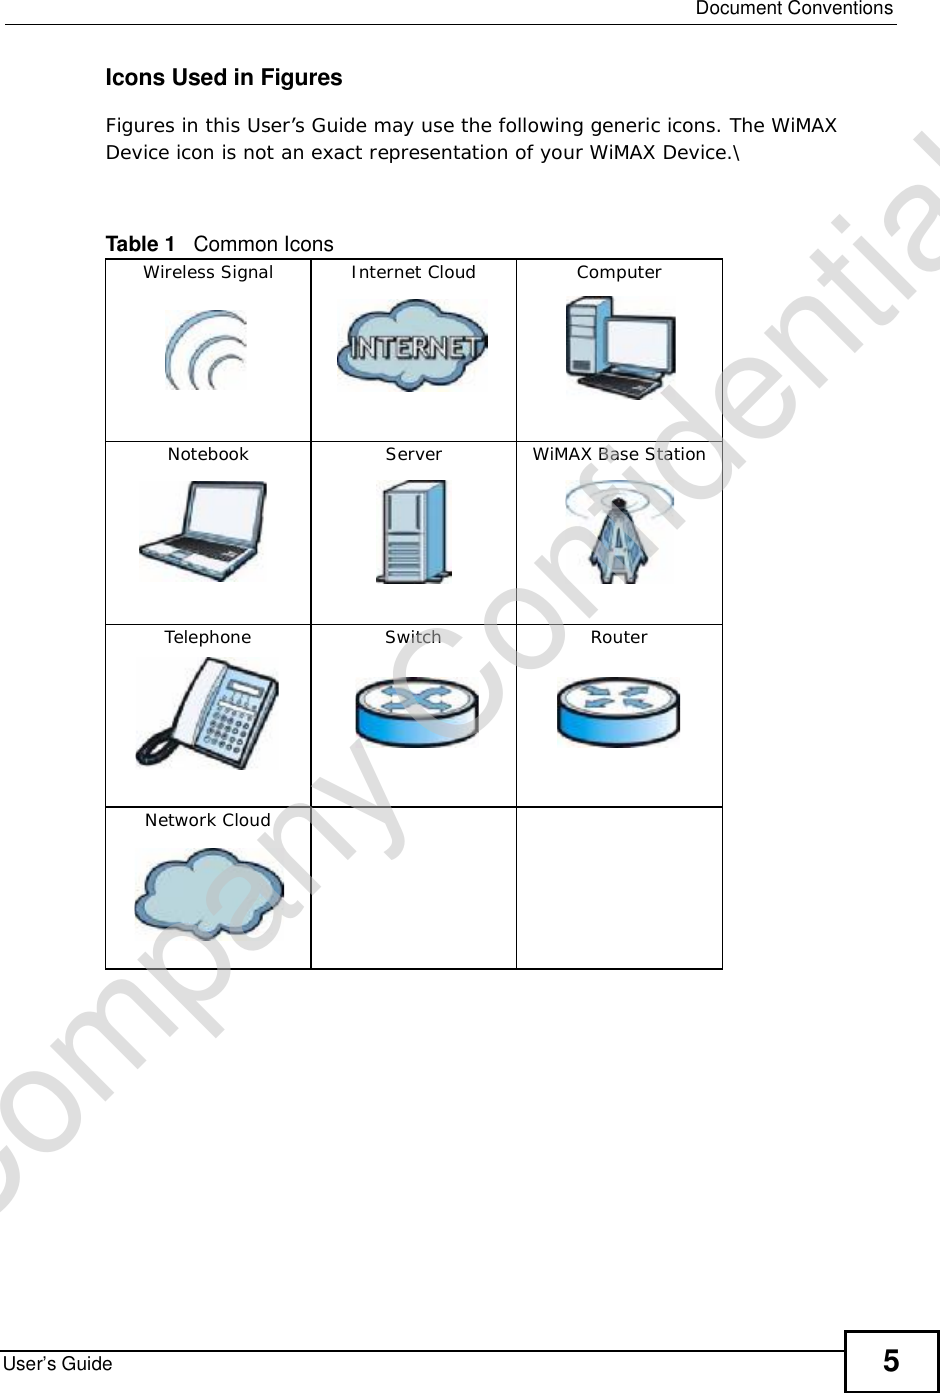  Document ConventionsUser’s Guide 5Icons Used in FiguresFigures in this User’s Guide may use the following generic icons. The WiMAX Device icon is not an exact representation of your WiMAX Device.\Table 1   Common IconsWireless SignalInternet CloudComputerNotebookServerWiMAX Base StationTelephoneSwitchRouterNetwork CloudCompany Confidential